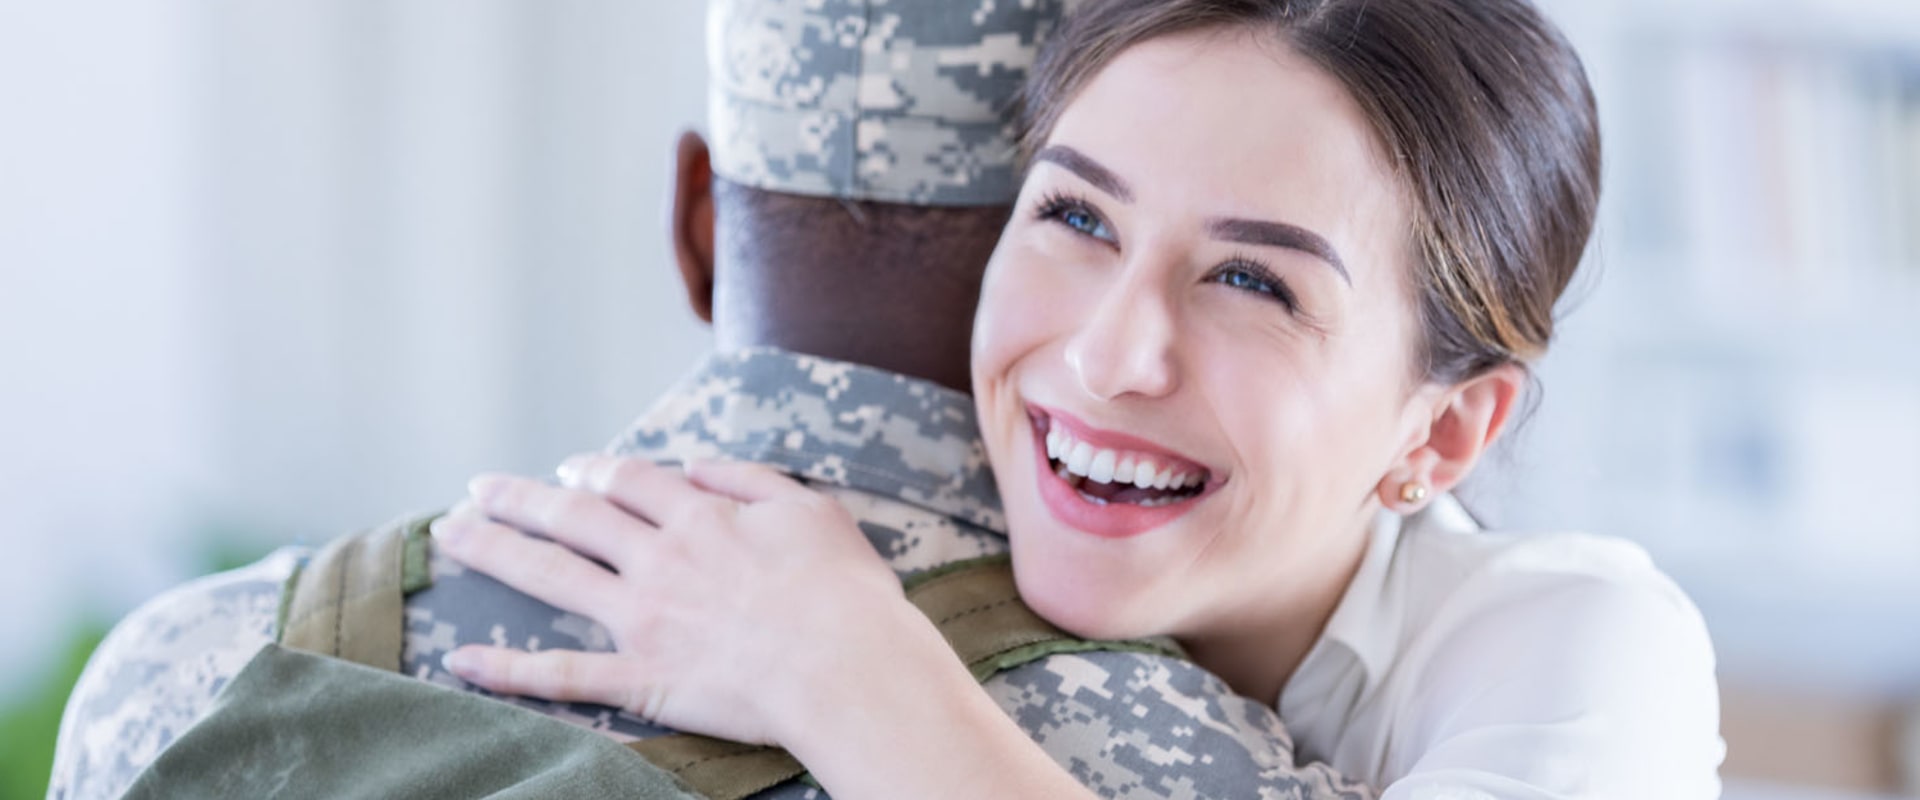 Community Services for Veterans in Middlesex County, MA